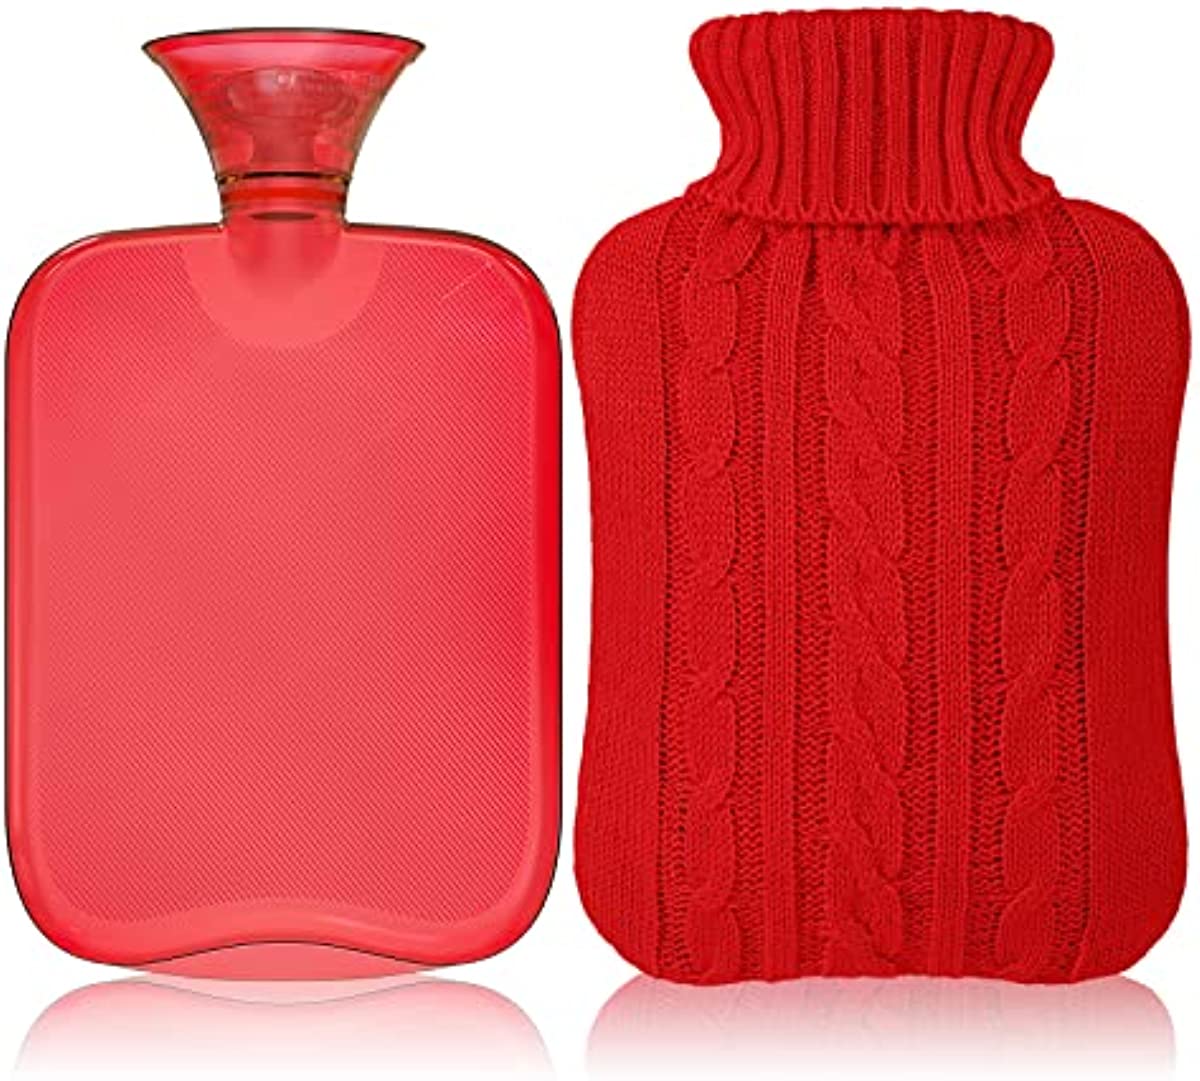 Attmu Rubber Hot Water Bottle with Cover Knitted, Transparent Hot Water Bag 2 Liter - Red